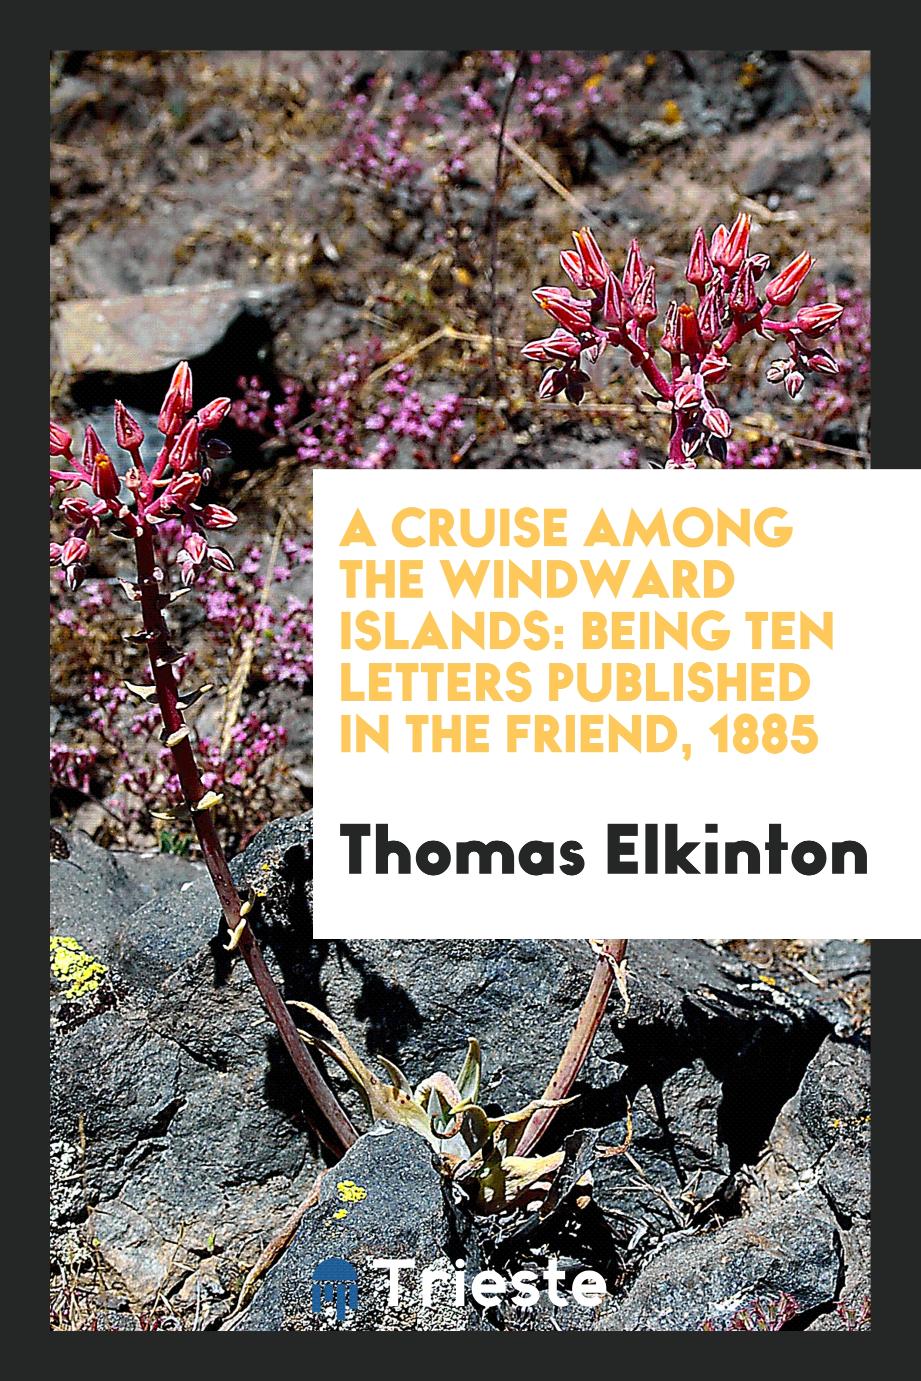 A cruise among the Windward Islands: being ten letters published in The Friend, 1885